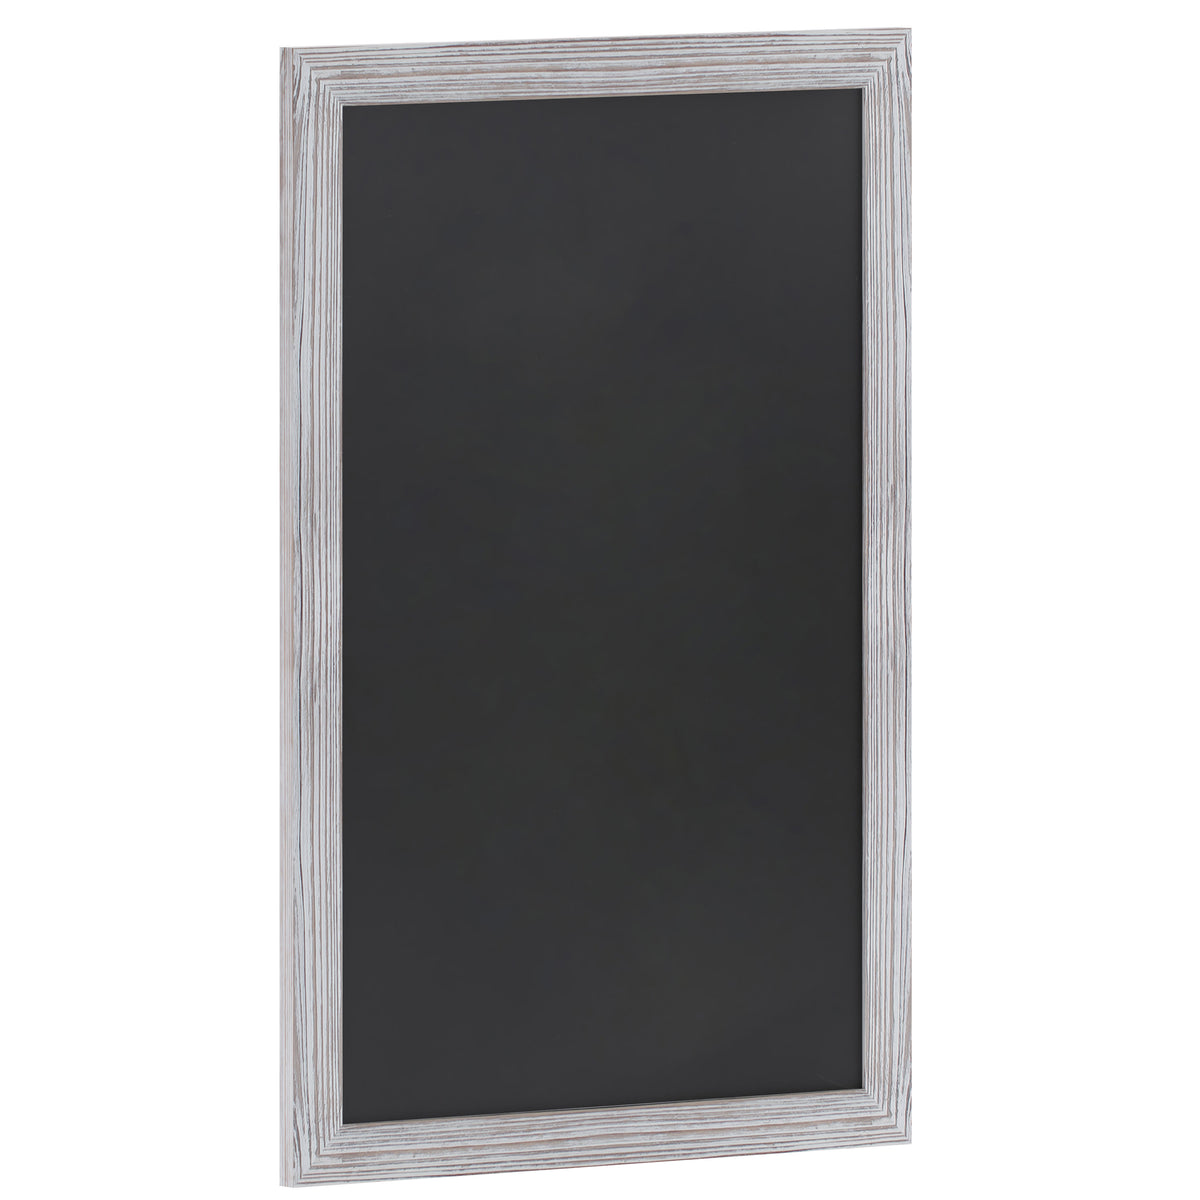 White Washed,24inchW x 0.75inchD x 36inchH |#| 24inch x 36inch Wall Mounted Magnetic Chalkboard with Wooden Frame - Whitewashed